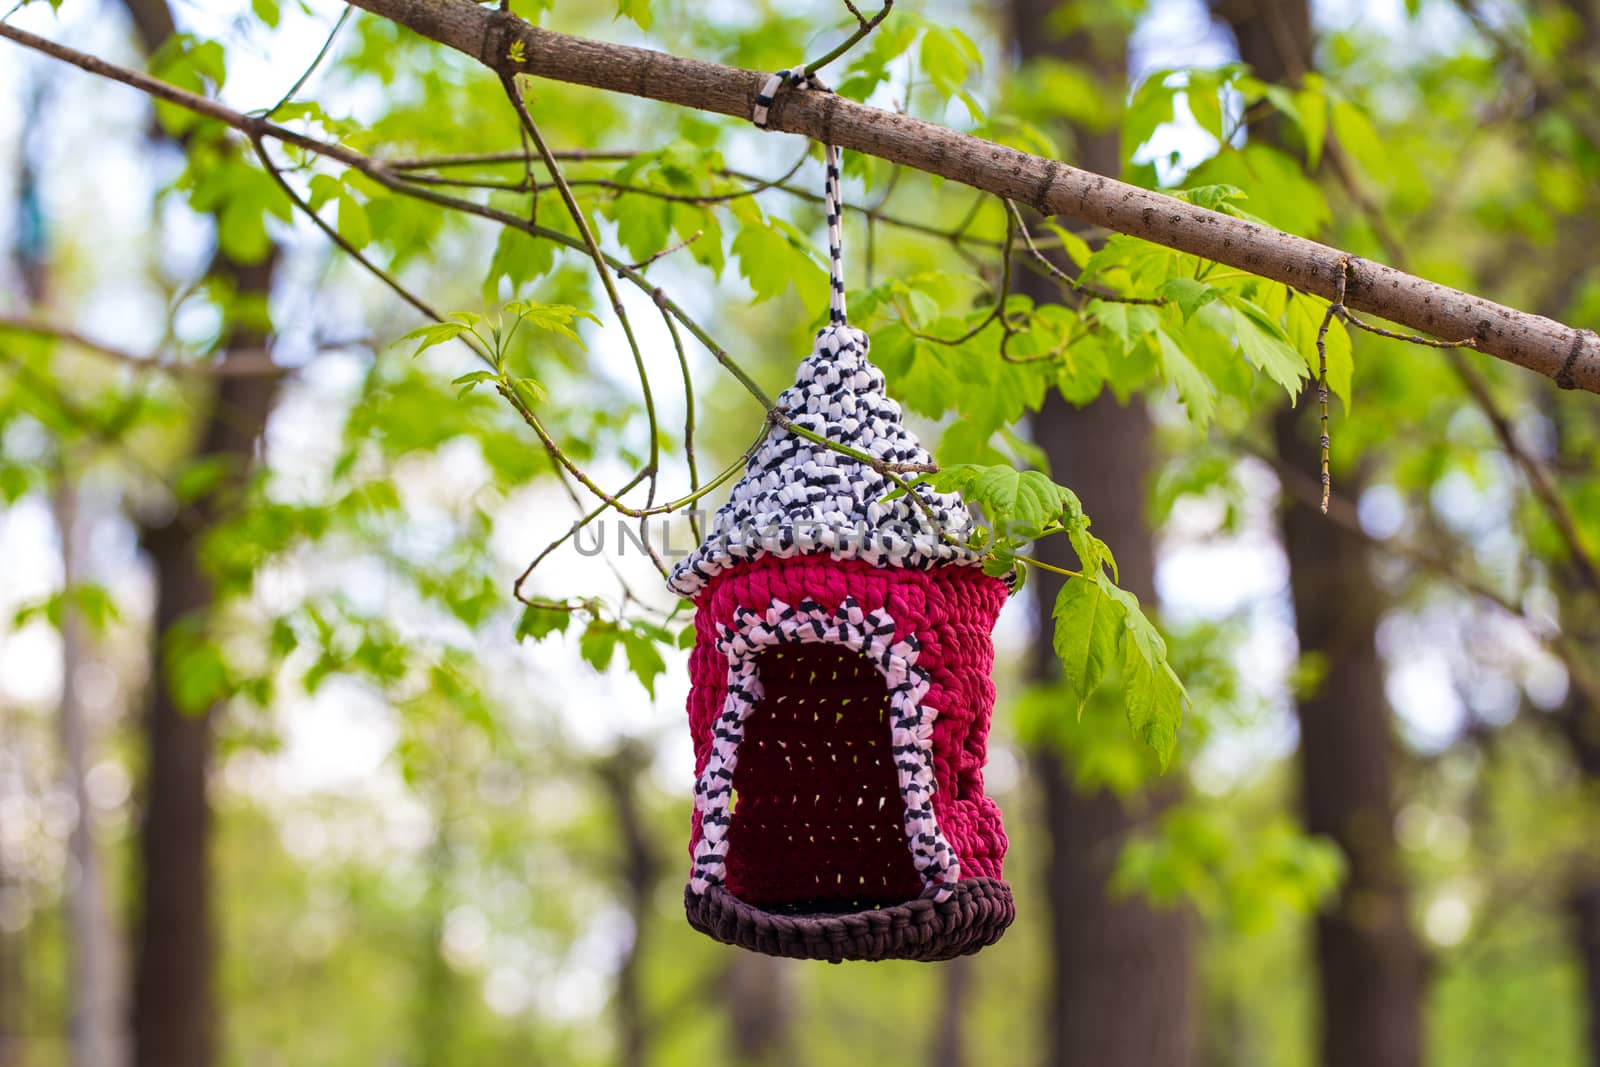 knitted from yarns birdhouse hanging in the park. by boys1983@mail.ru